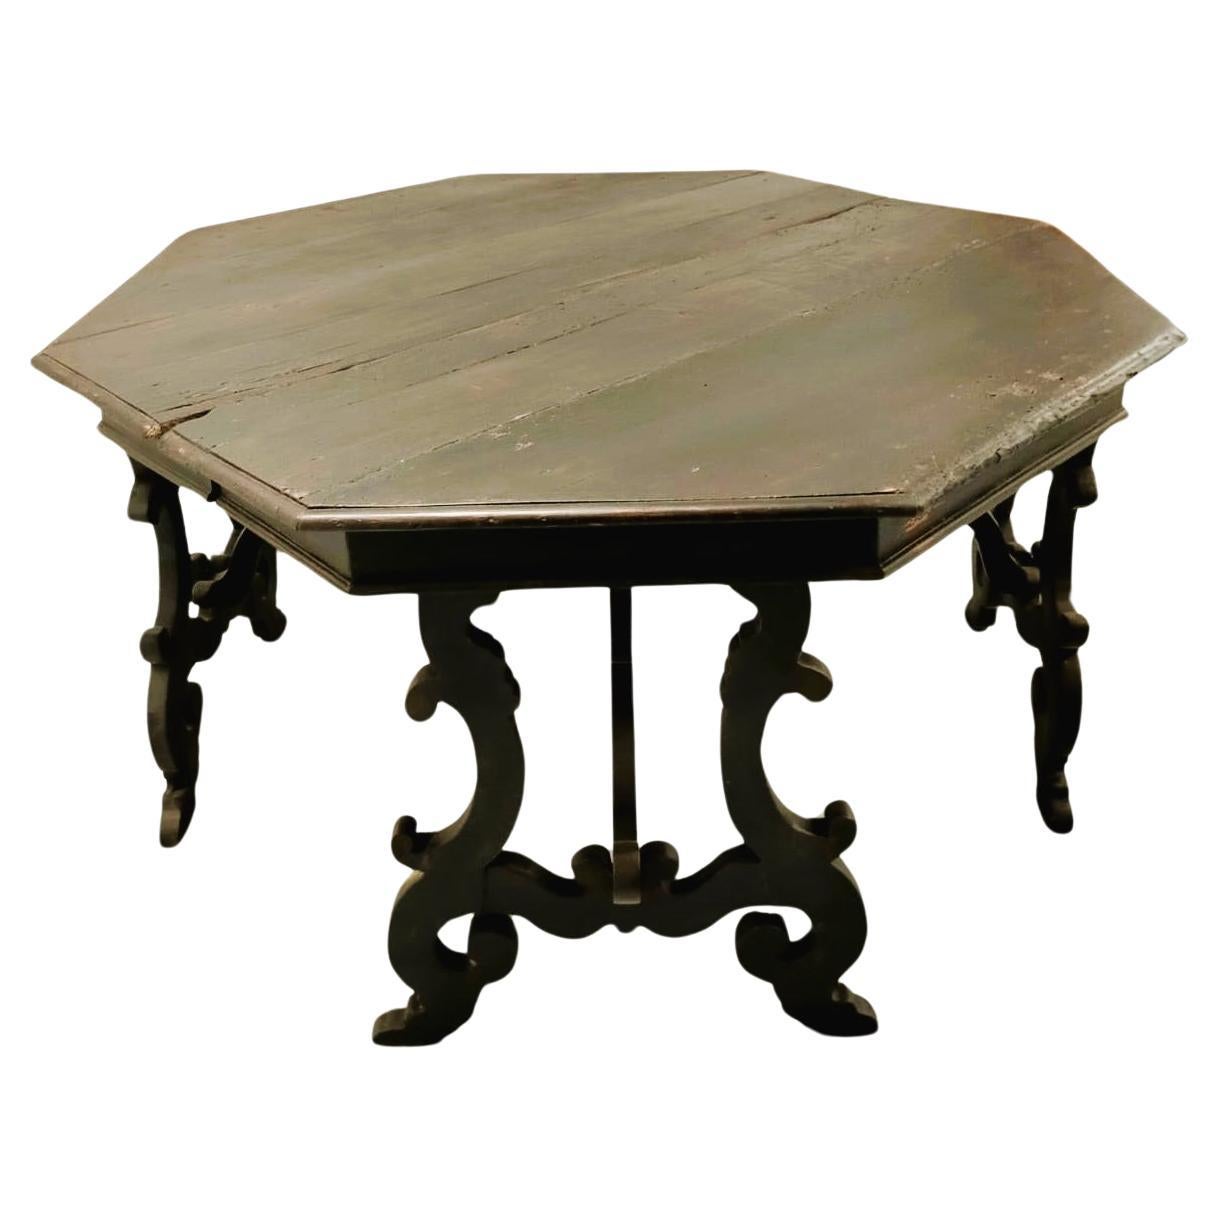 3 Octagonal Lyre-style Tables (6 consoles), in seventeenth-century style For Sale